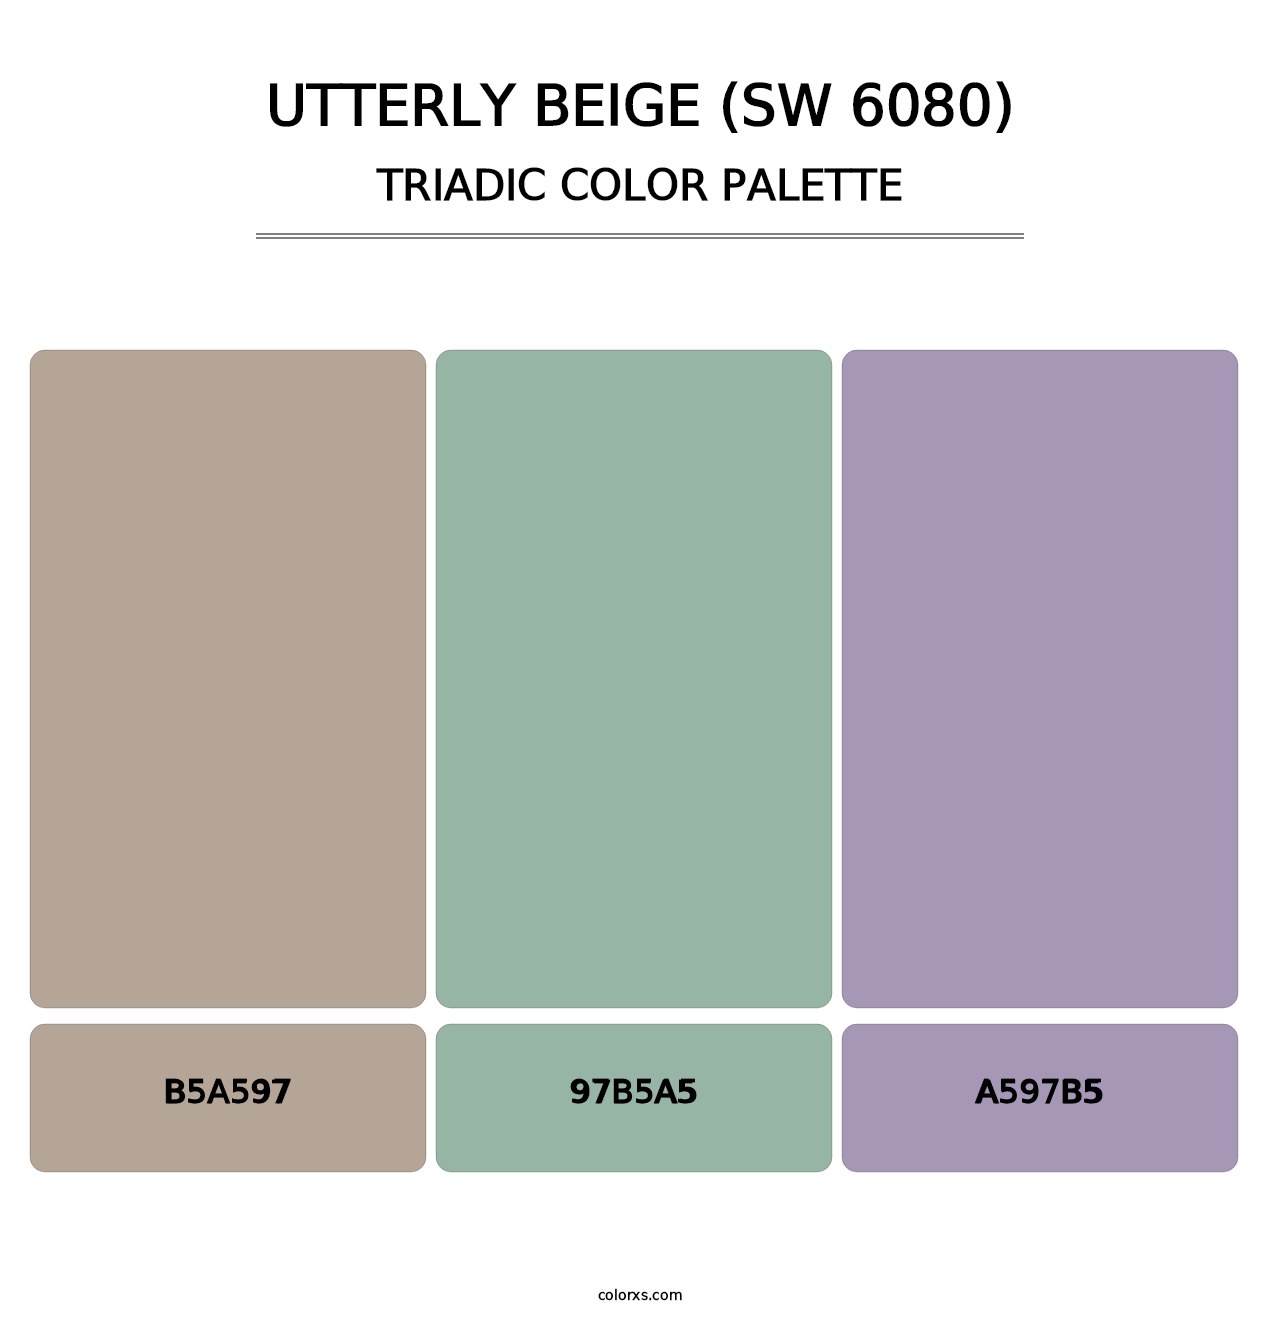 Utterly Beige (SW 6080) - Triadic Color Palette